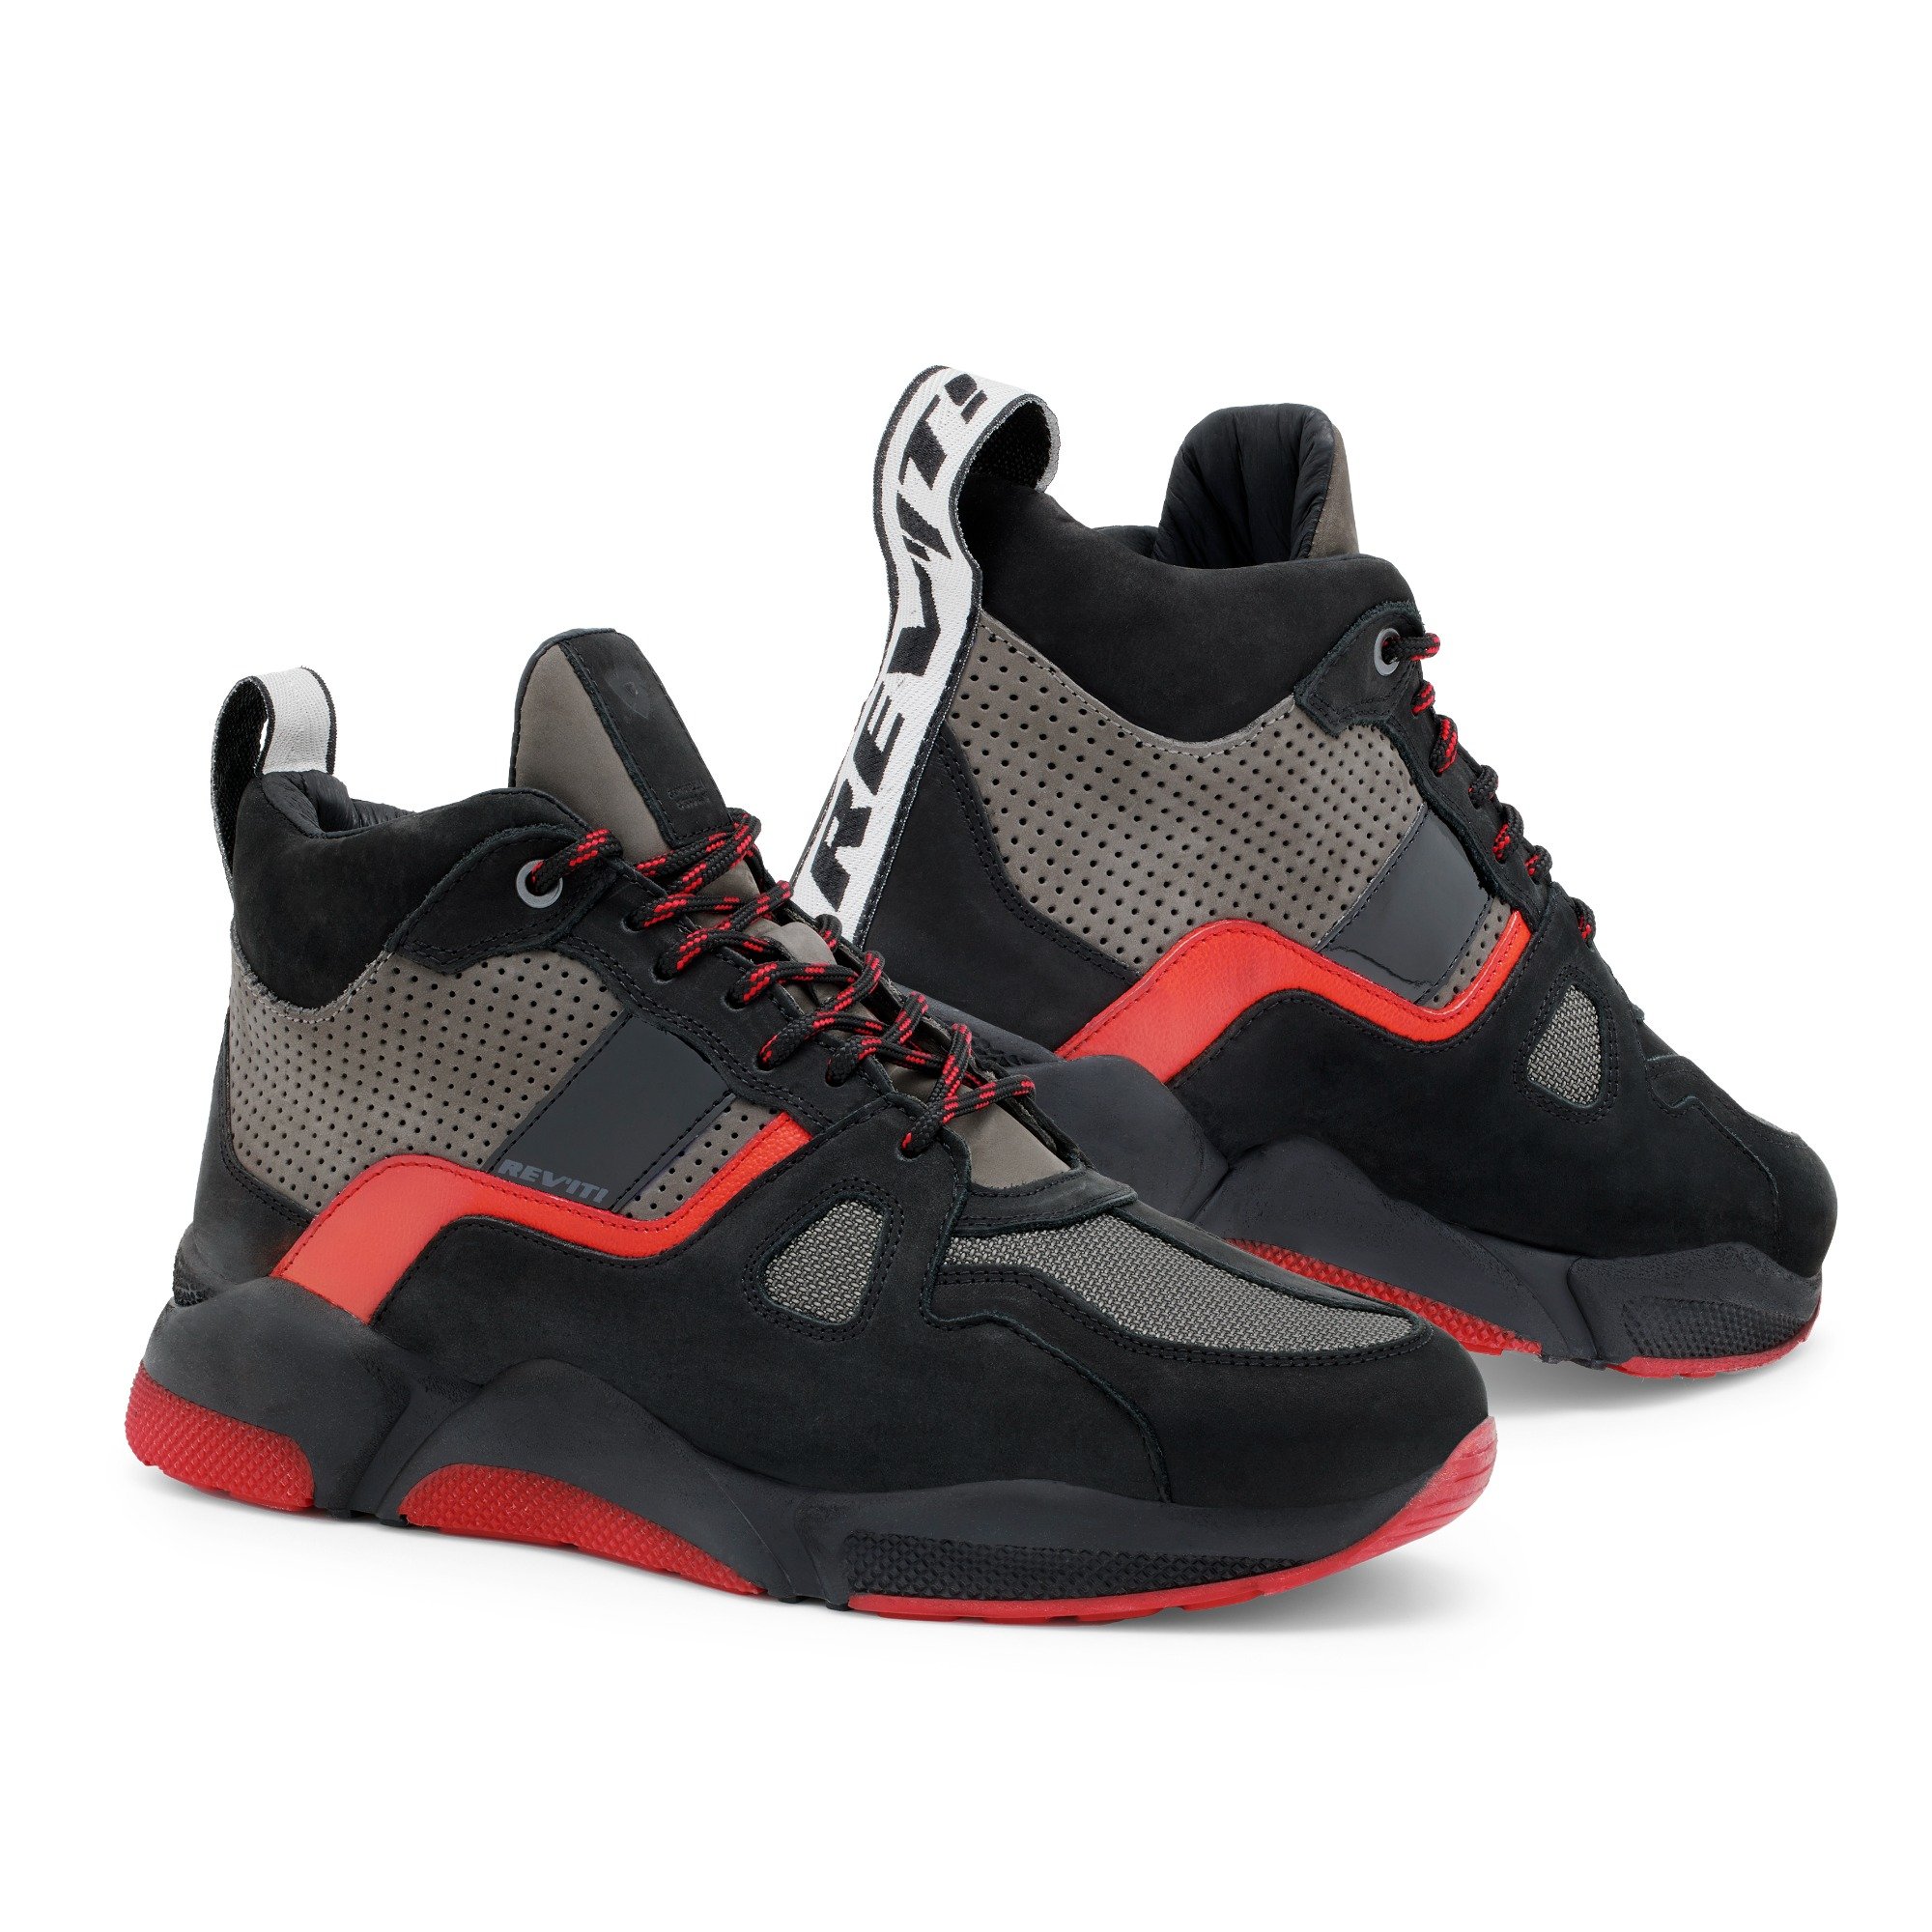 Image of REV'IT! Astro Black Red Size 46 ID 8700001356855